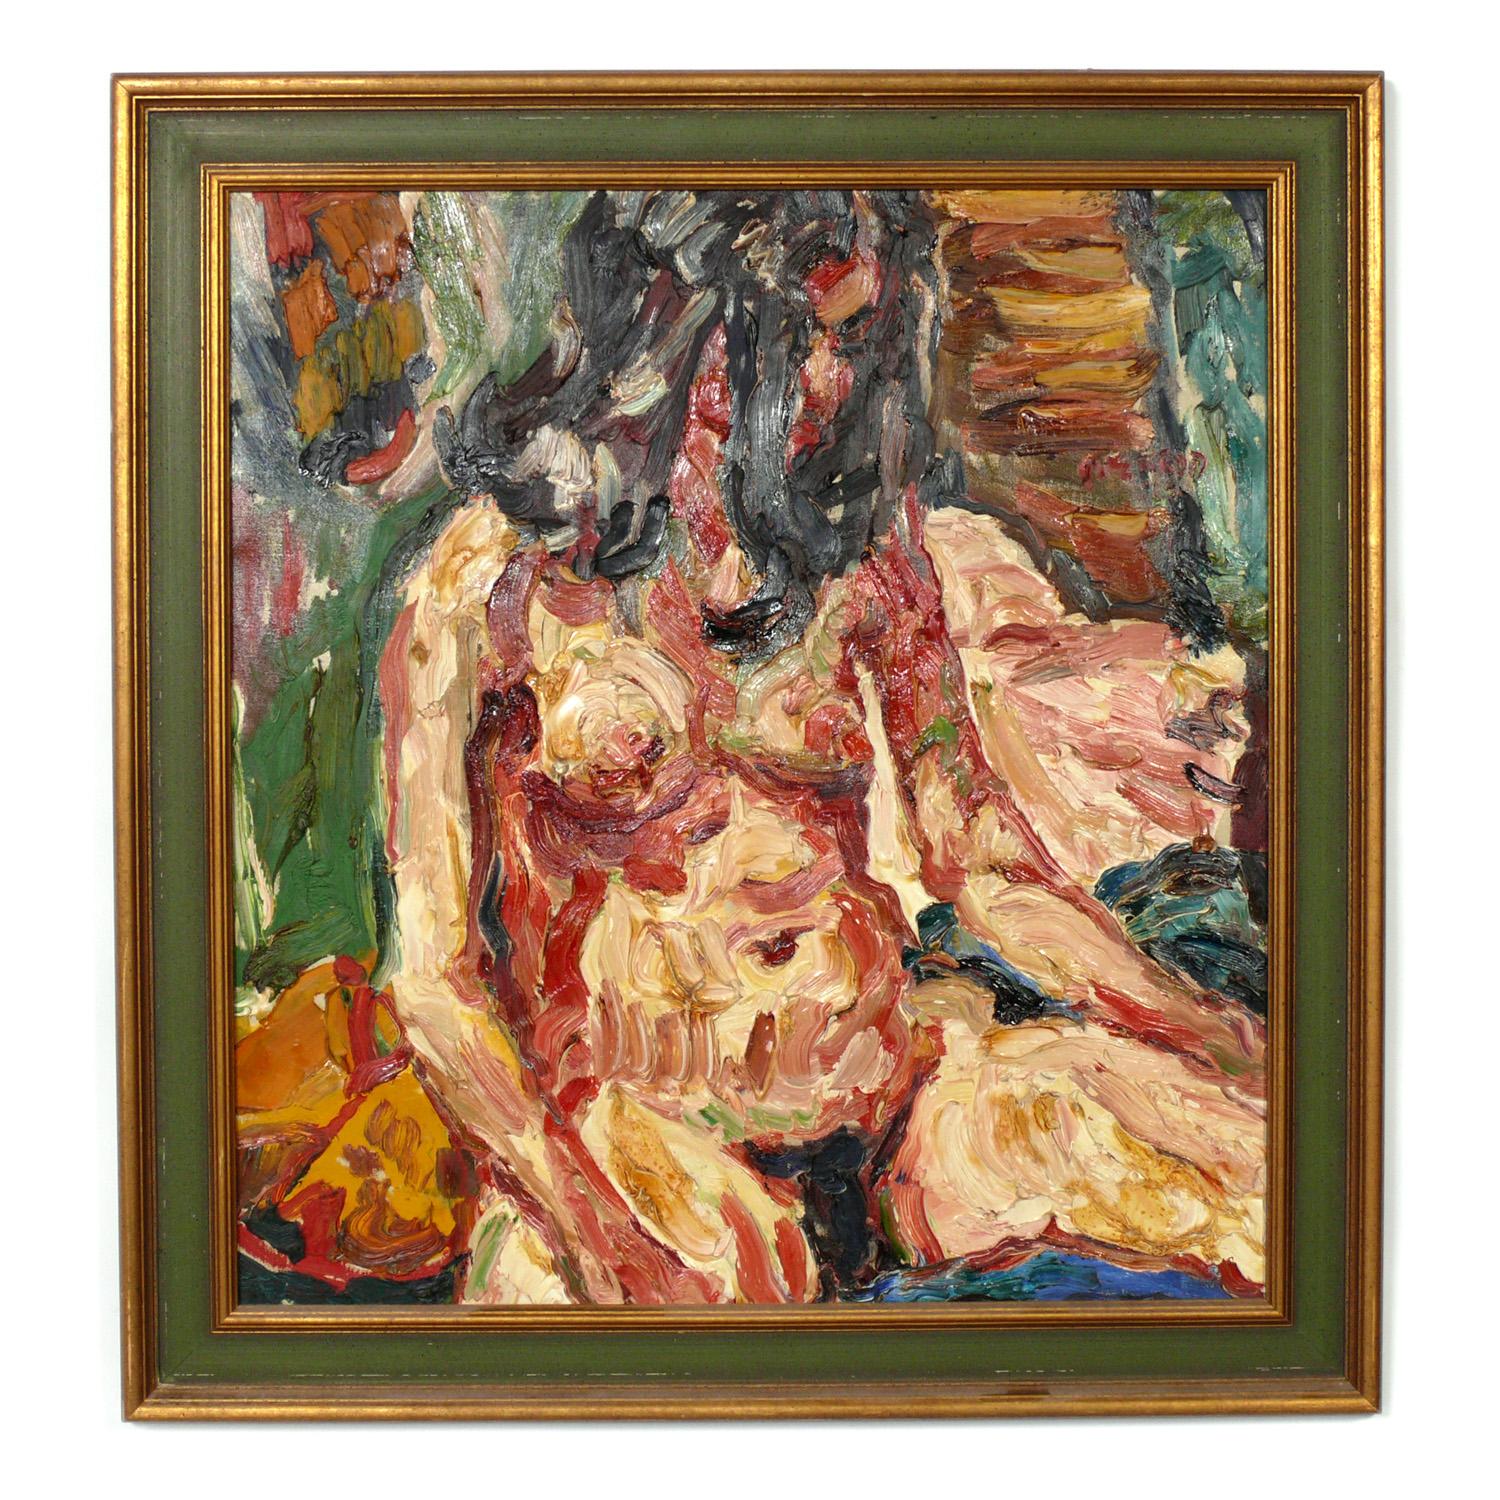 Selection of large scale nude female oil paintings by Philip Sherrod, American, circa 1960s. Great thick impasto technique.
From left to right, as seen in the first photo, they measure:
1) 33